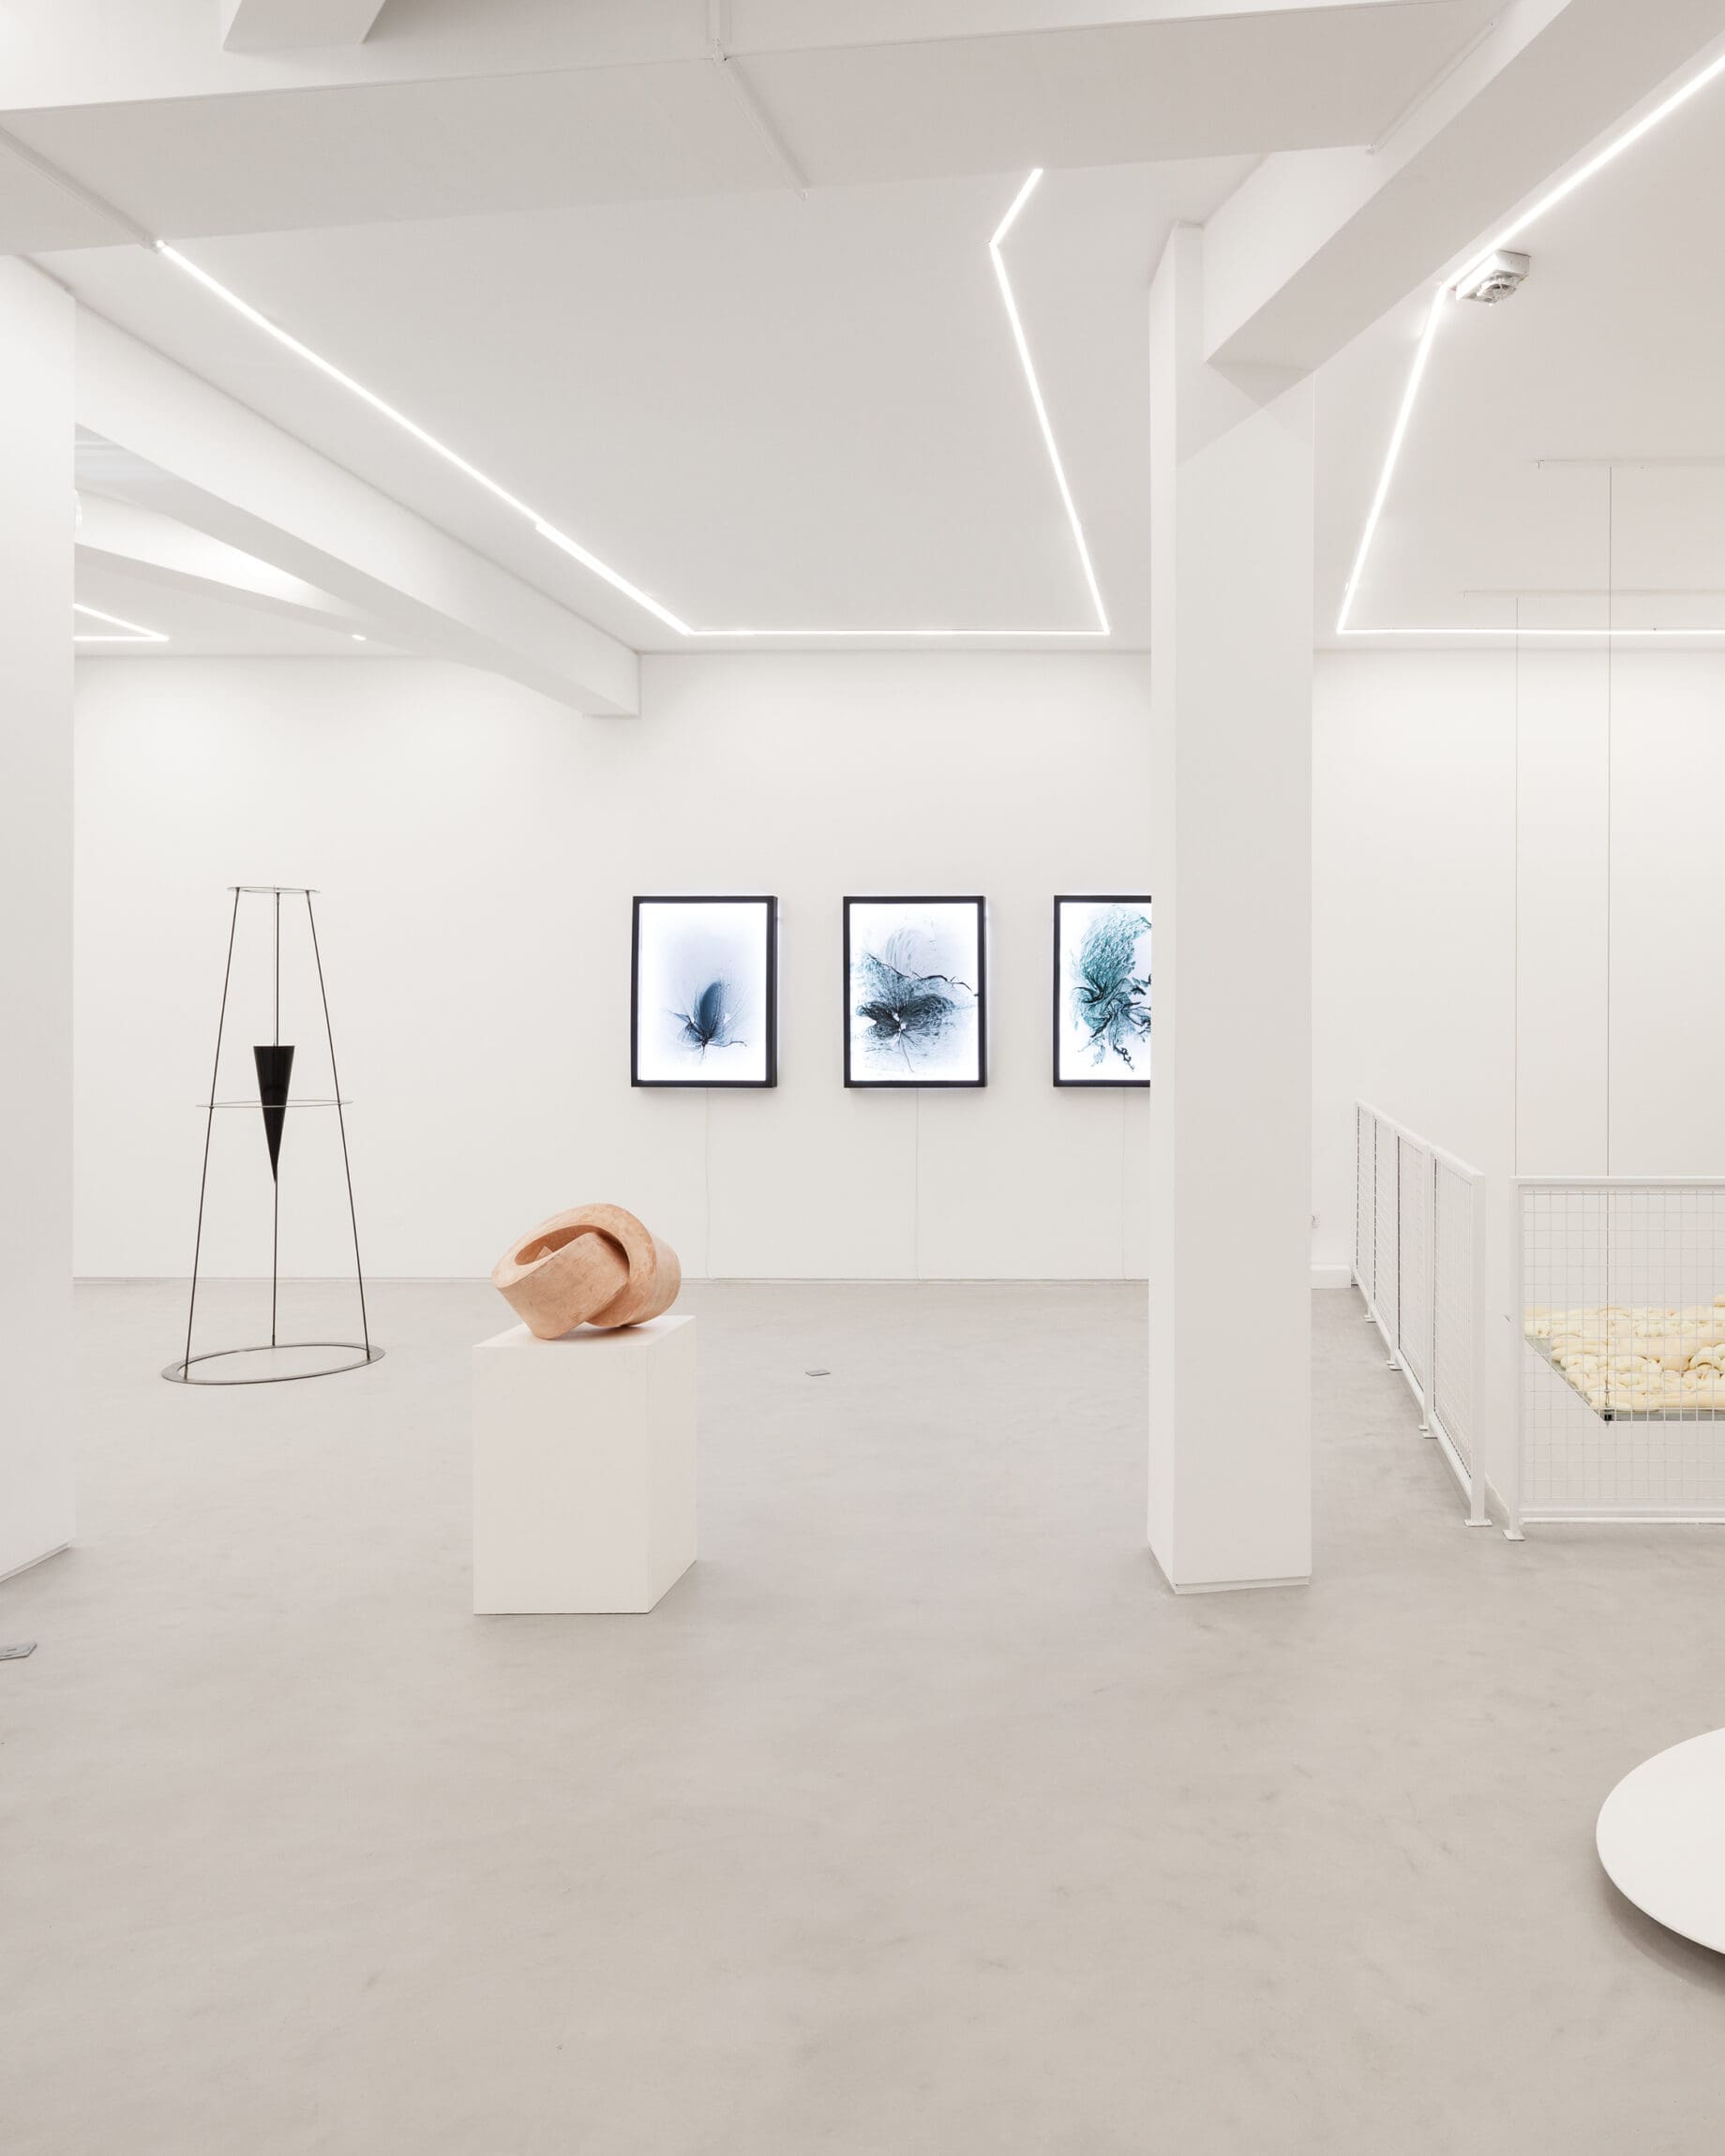 The best art galleries and museums in Lisbon | A group show at Galeria Foco called Amuse Bouche